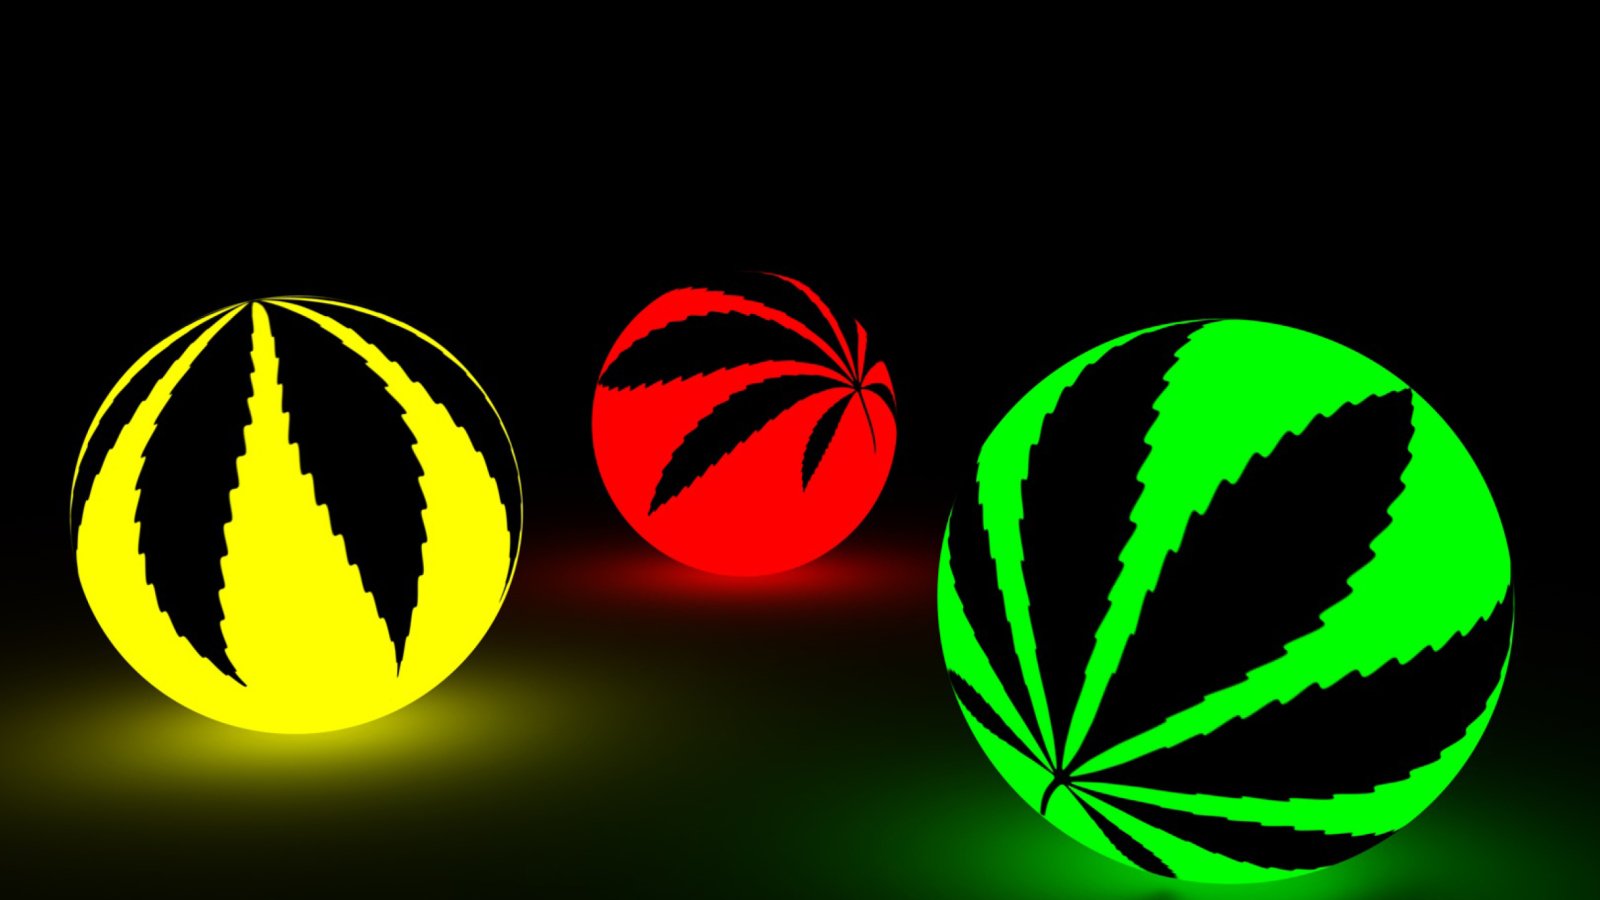 Neon Weed Balls Mobile Background   Download Free Mobile Wallpapers at